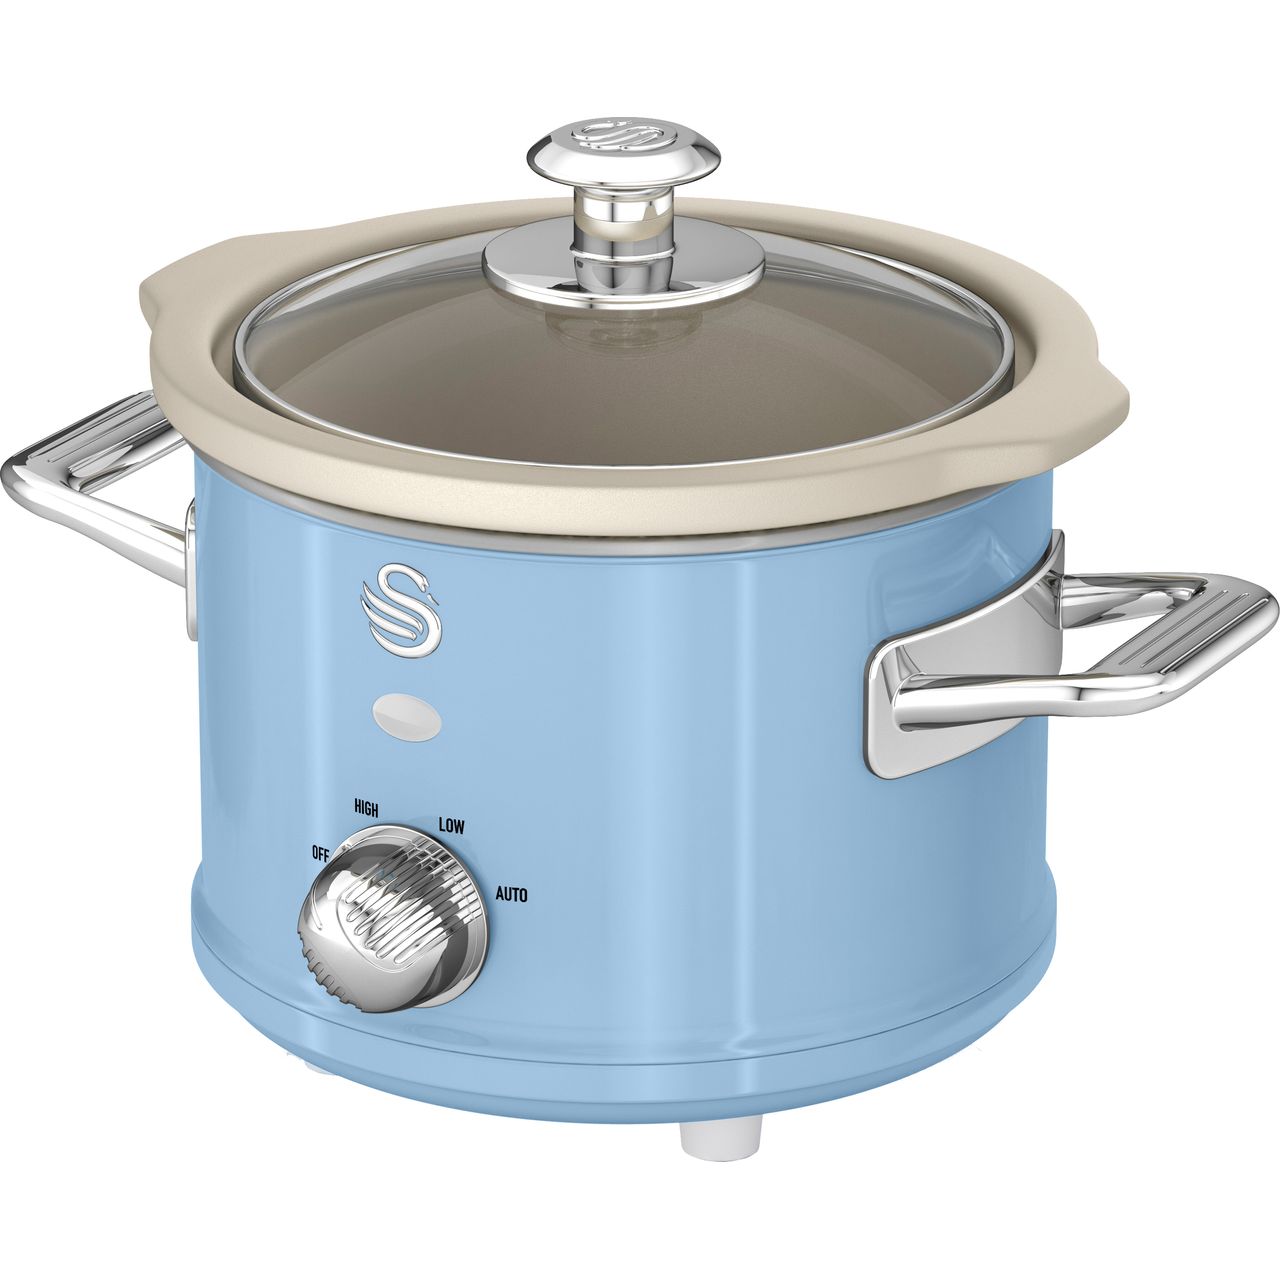 Swan Retro SF17011BLN 1.5 Litre Slow Cooker Review